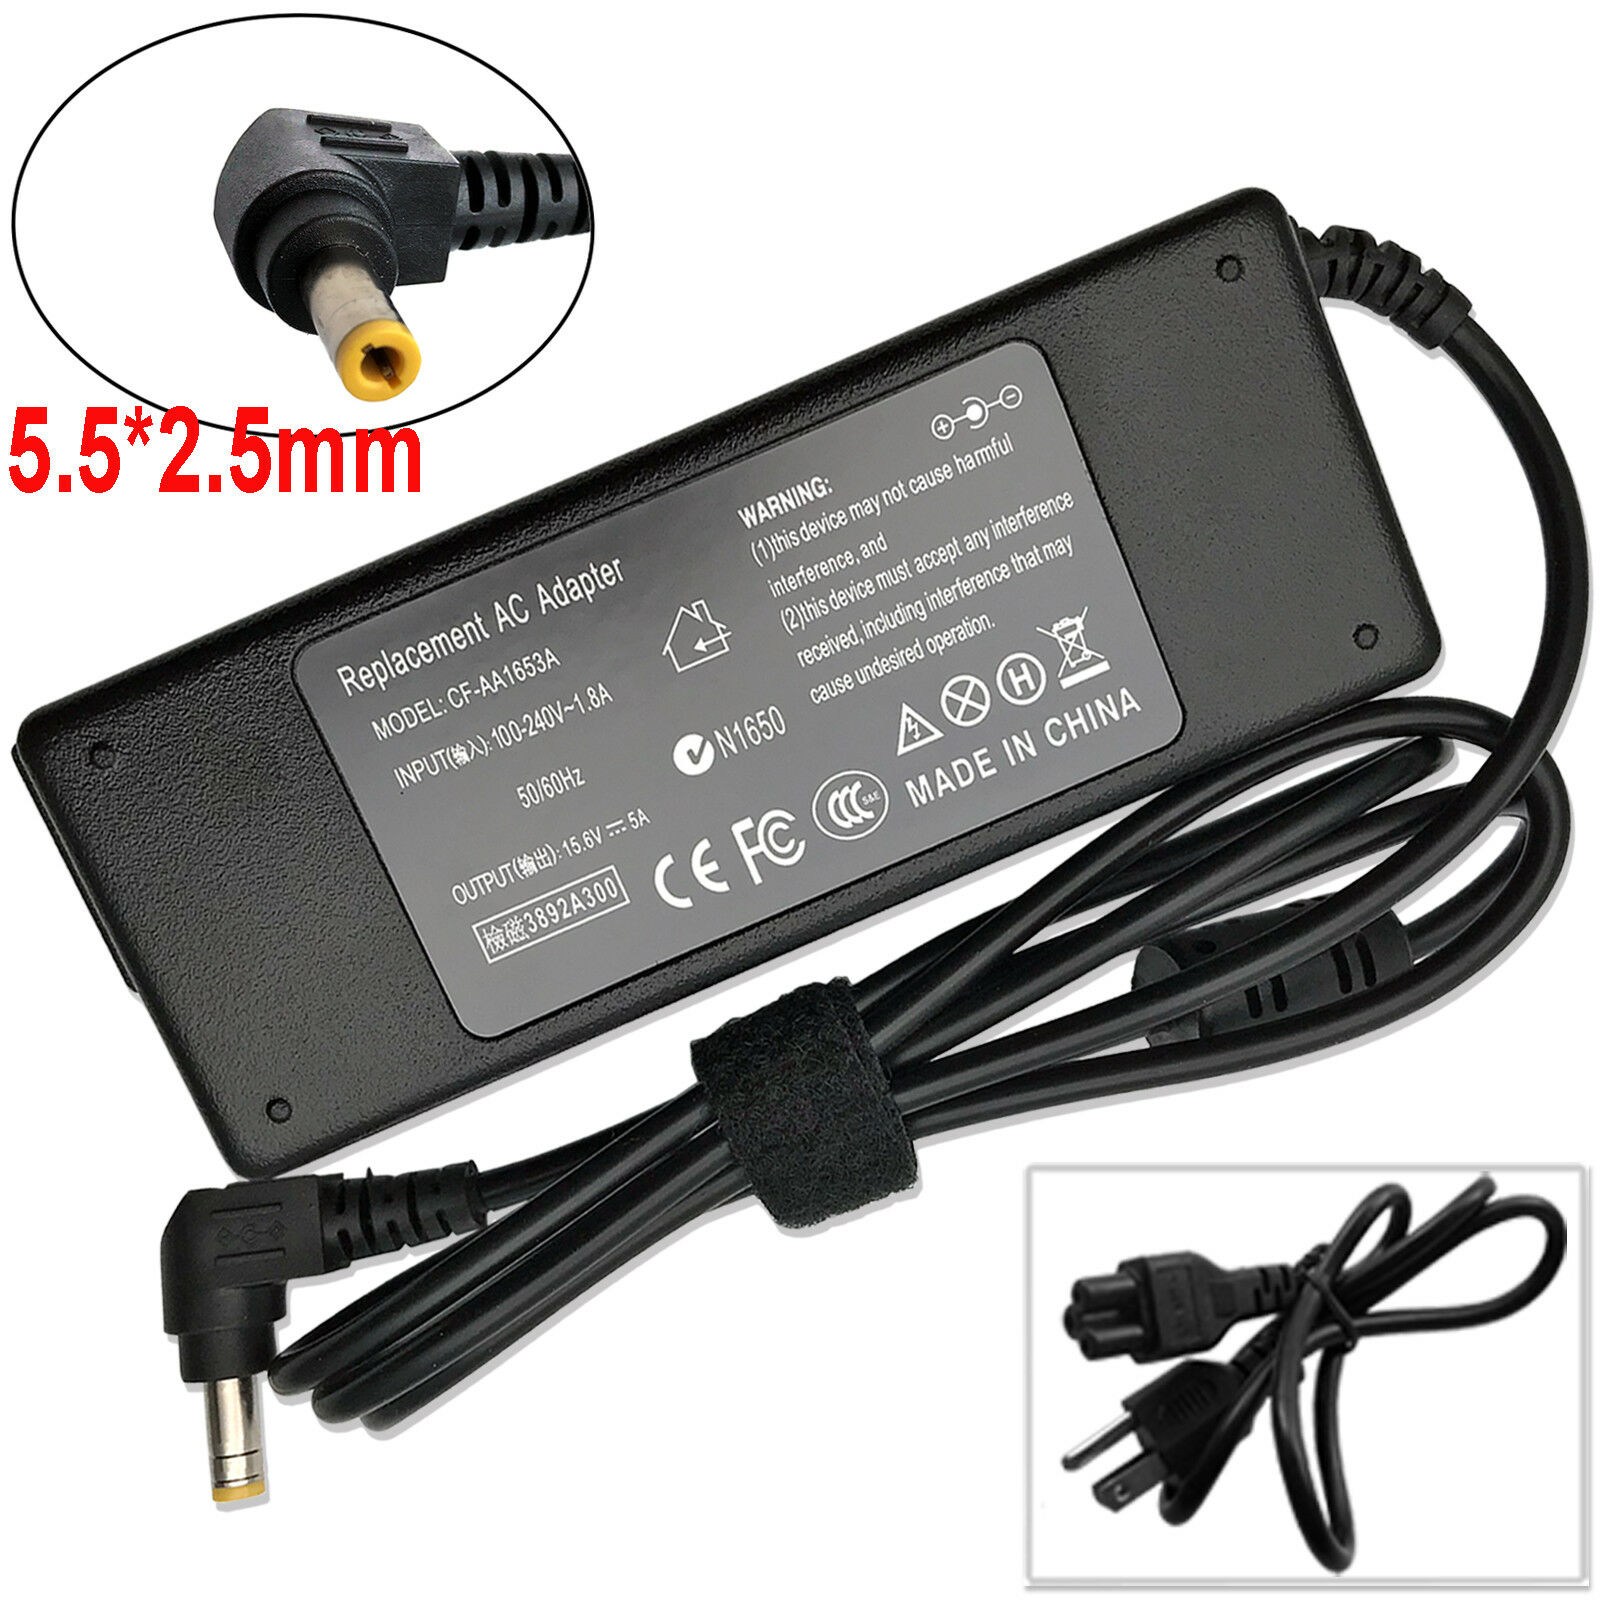 AC Adapter Charger for Panasonic ToughBook CF-18 CF-29 CF-30 CF-34 CF-50 CF-73 Brand: Unbranded/Generic Output Volta - Click Image to Close